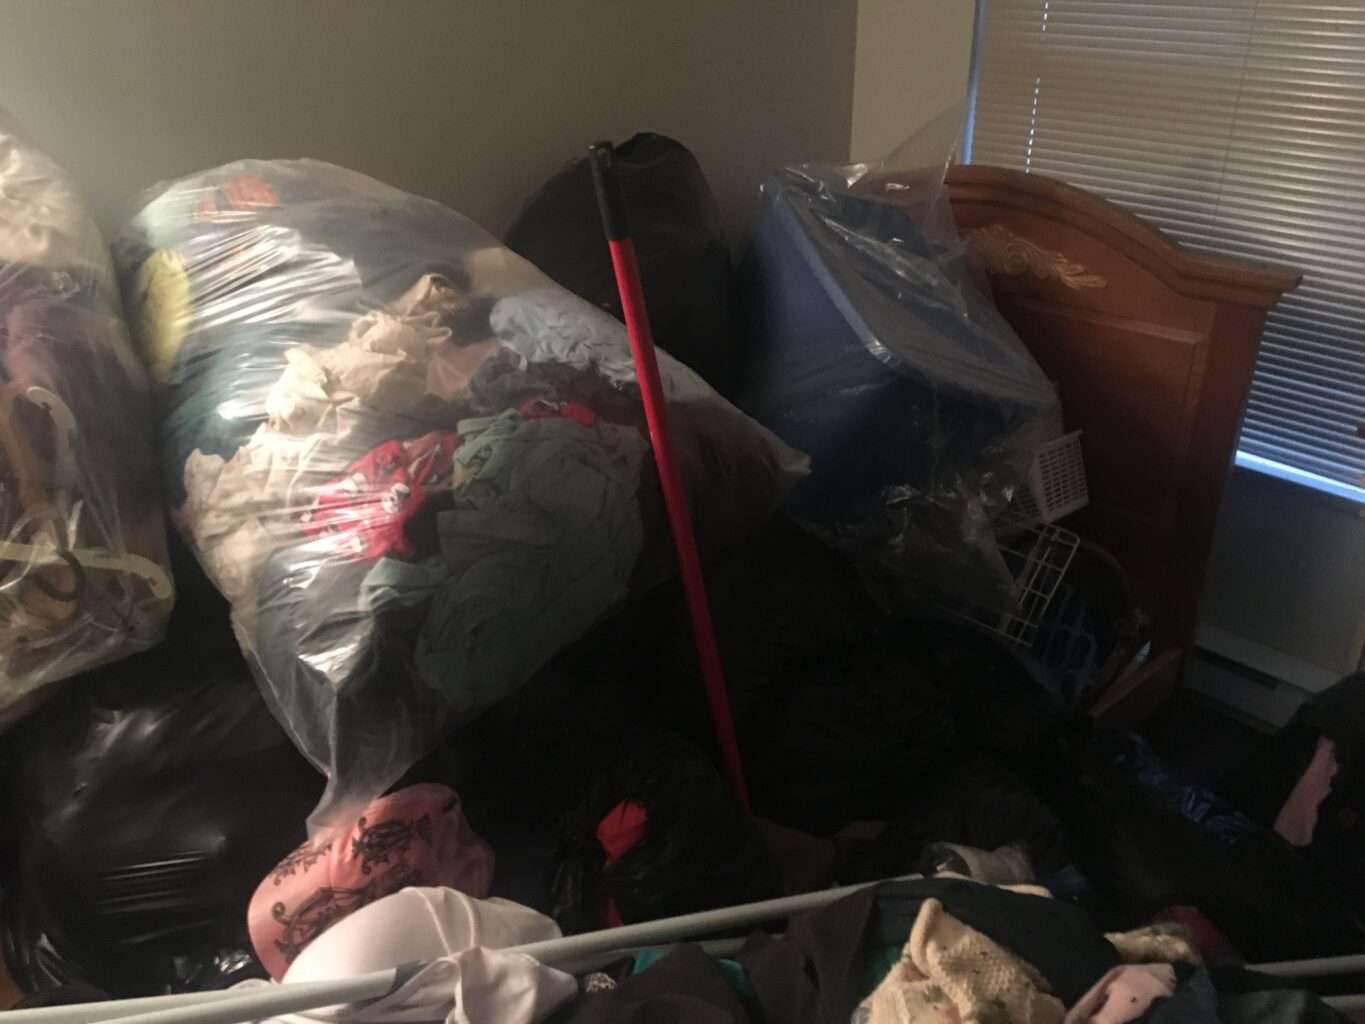 The bedroom is full of bags and clothing before a hoarding removal in Richmond.